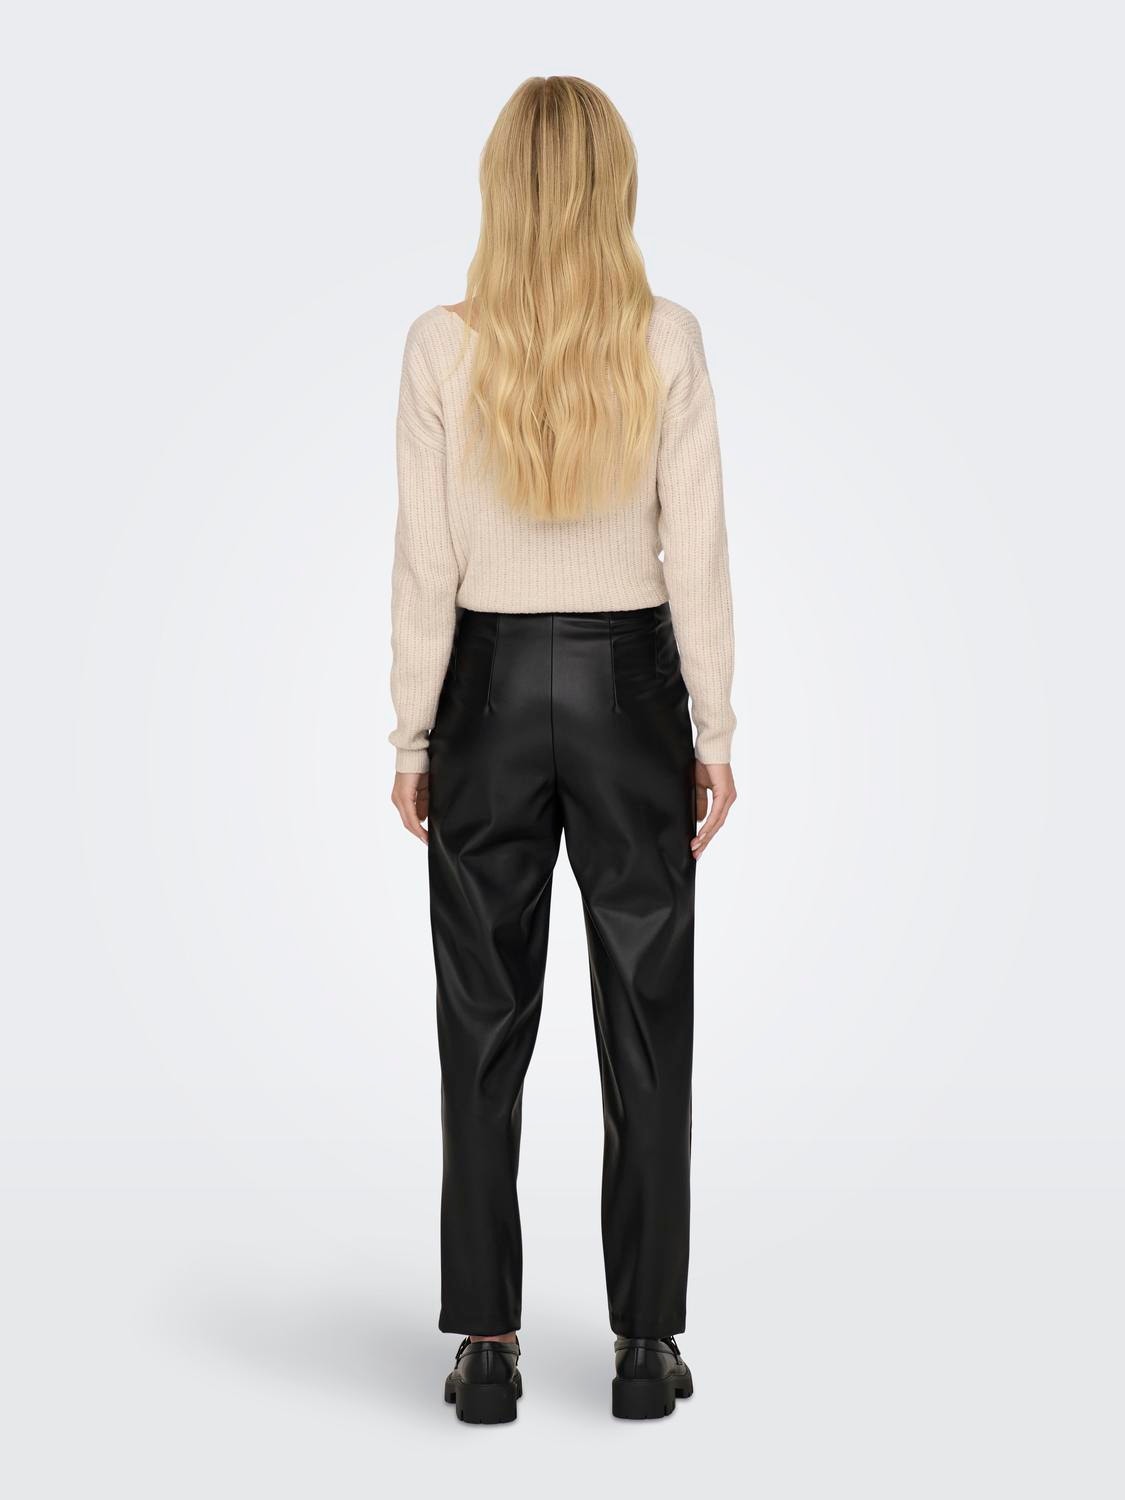 ONLY High waisted pants of faux leather -Black - 15298705